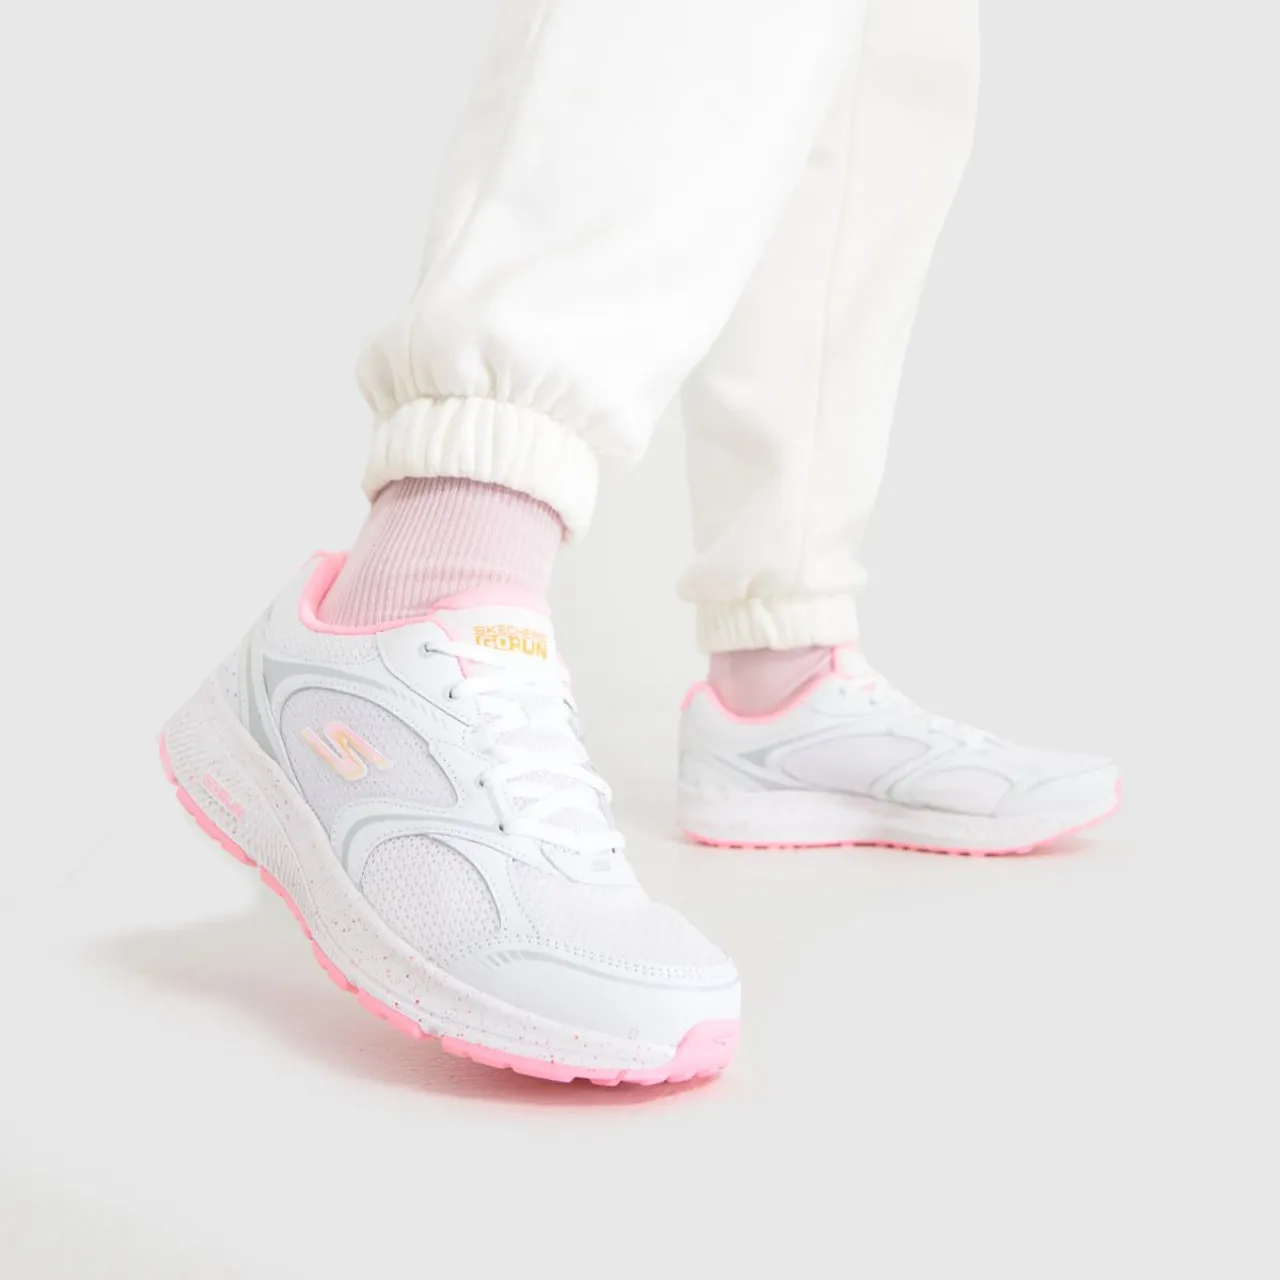 Skechers Go Run Consistent Runner Trainers In White & Pink